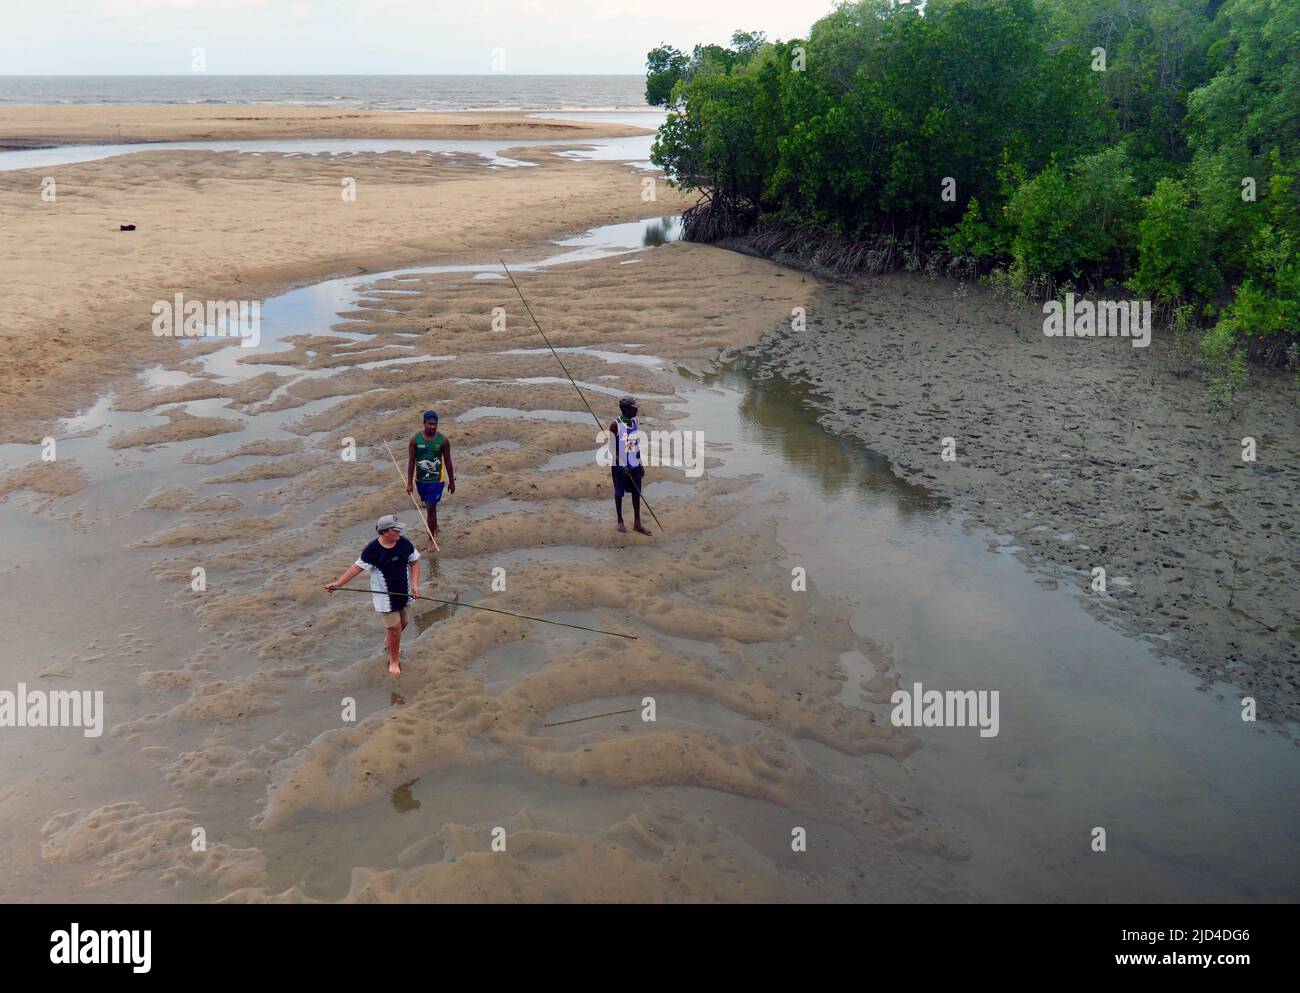 Indigenous youth foraging on sand flats and among mangroves at low tide, Barrs Creek, Cairns, Queensland, Australia. No MR Stock Photo